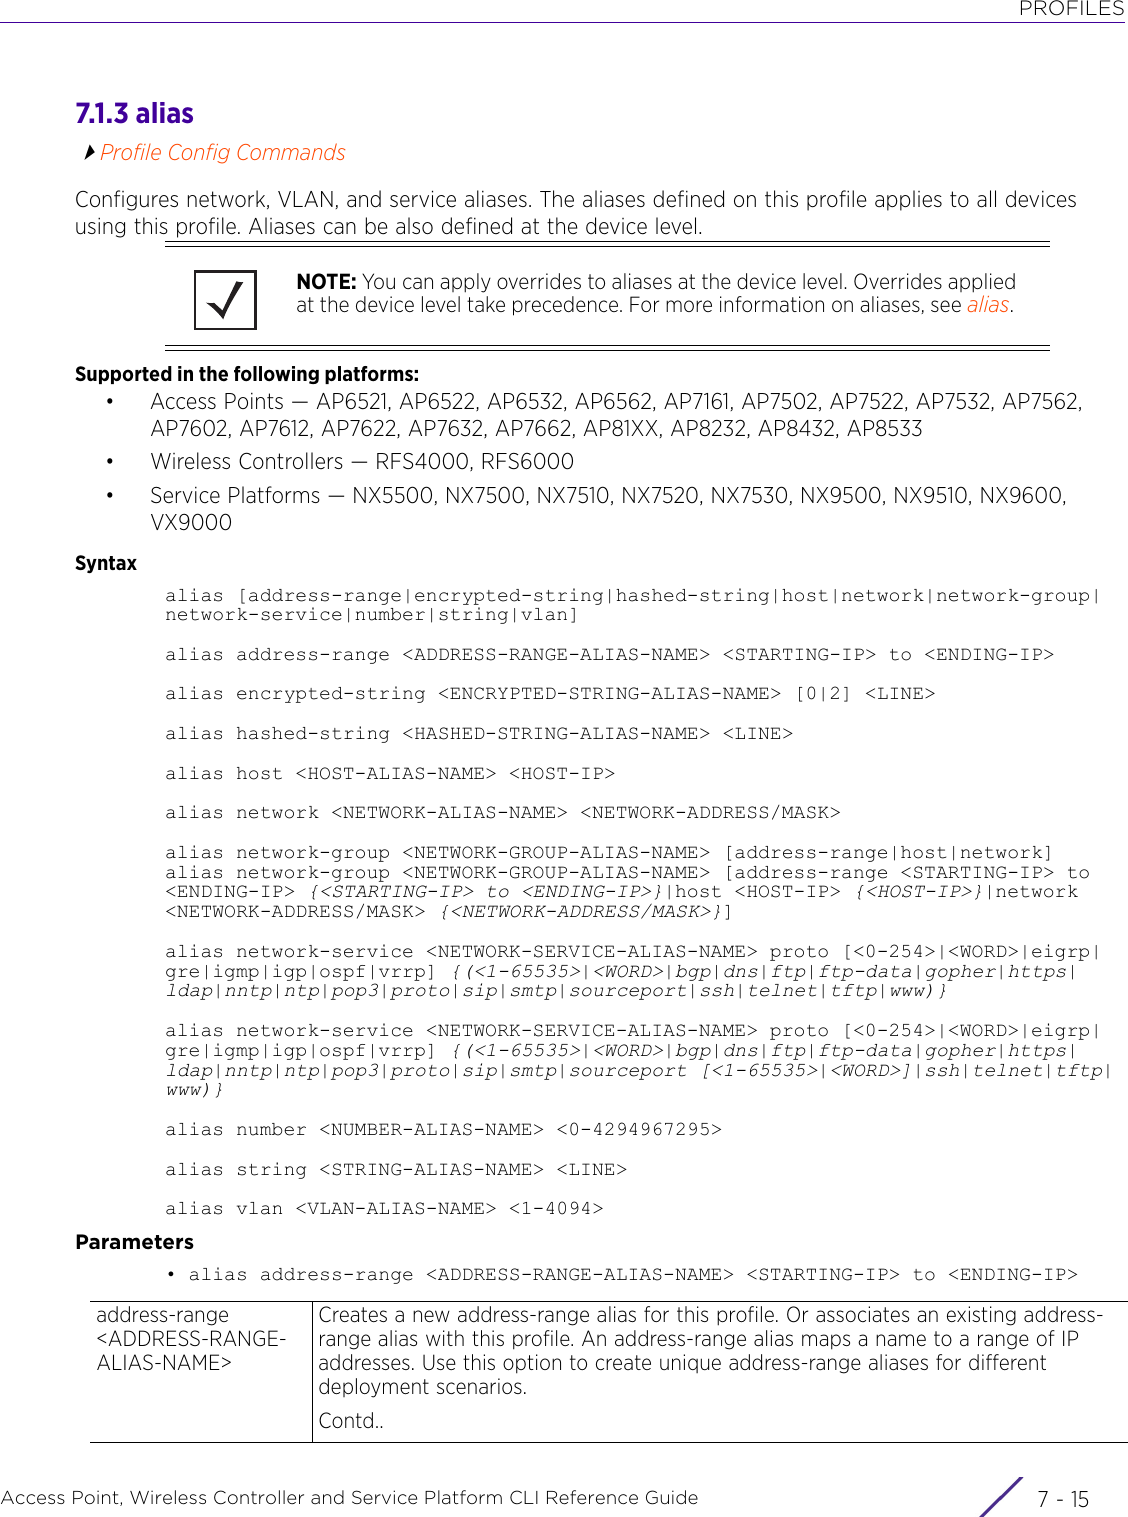 PROFILESAccess Point, Wireless Controller and Service Platform CLI Reference Guide 7 - 157.1.3 aliasProfile Config CommandsConfigures network, VLAN, and service aliases. The aliases defined on this profile applies to all devices using this profile. Aliases can be also defined at the device level.Supported in the following platforms:• Access Points — AP6521, AP6522, AP6532, AP6562, AP7161, AP7502, AP7522, AP7532, AP7562, AP7602, AP7612, AP7622, AP7632, AP7662, AP81XX, AP8232, AP8432, AP8533• Wireless Controllers — RFS4000, RFS6000• Service Platforms — NX5500, NX7500, NX7510, NX7520, NX7530, NX9500, NX9510, NX9600, VX9000Syntaxalias [address-range|encrypted-string|hashed-string|host|network|network-group|network-service|number|string|vlan]alias address-range &lt;ADDRESS-RANGE-ALIAS-NAME&gt; &lt;STARTING-IP&gt; to &lt;ENDING-IP&gt;alias encrypted-string &lt;ENCRYPTED-STRING-ALIAS-NAME&gt; [0|2] &lt;LINE&gt;alias hashed-string &lt;HASHED-STRING-ALIAS-NAME&gt; &lt;LINE&gt;alias host &lt;HOST-ALIAS-NAME&gt; &lt;HOST-IP&gt;alias network &lt;NETWORK-ALIAS-NAME&gt; &lt;NETWORK-ADDRESS/MASK&gt;alias network-group &lt;NETWORK-GROUP-ALIAS-NAME&gt; [address-range|host|network]alias network-group &lt;NETWORK-GROUP-ALIAS-NAME&gt; [address-range &lt;STARTING-IP&gt; to &lt;ENDING-IP&gt; {&lt;STARTING-IP&gt; to &lt;ENDING-IP&gt;}|host &lt;HOST-IP&gt; {&lt;HOST-IP&gt;}|network &lt;NETWORK-ADDRESS/MASK&gt; {&lt;NETWORK-ADDRESS/MASK&gt;}]alias network-service &lt;NETWORK-SERVICE-ALIAS-NAME&gt; proto [&lt;0-254&gt;|&lt;WORD&gt;|eigrp|gre|igmp|igp|ospf|vrrp] {(&lt;1-65535&gt;|&lt;WORD&gt;|bgp|dns|ftp|ftp-data|gopher|https|ldap|nntp|ntp|pop3|proto|sip|smtp|sourceport|ssh|telnet|tftp|www)}alias network-service &lt;NETWORK-SERVICE-ALIAS-NAME&gt; proto [&lt;0-254&gt;|&lt;WORD&gt;|eigrp|gre|igmp|igp|ospf|vrrp] {(&lt;1-65535&gt;|&lt;WORD&gt;|bgp|dns|ftp|ftp-data|gopher|https|ldap|nntp|ntp|pop3|proto|sip|smtp|sourceport [&lt;1-65535&gt;|&lt;WORD&gt;]|ssh|telnet|tftp|www)}alias number &lt;NUMBER-ALIAS-NAME&gt; &lt;0-4294967295&gt;alias string &lt;STRING-ALIAS-NAME&gt; &lt;LINE&gt;alias vlan &lt;VLAN-ALIAS-NAME&gt; &lt;1-4094&gt;Parameters• alias address-range &lt;ADDRESS-RANGE-ALIAS-NAME&gt; &lt;STARTING-IP&gt; to &lt;ENDING-IP&gt;NOTE: You can apply overrides to aliases at the device level. Overrides applied at the device level take precedence. For more information on aliases, see alias.address-range &lt;ADDRESS-RANGE-ALIAS-NAME&gt;Creates a new address-range alias for this profile. Or associates an existing address-range alias with this profile. An address-range alias maps a name to a range of IP addresses. Use this option to create unique address-range aliases for different deployment scenarios. Contd..